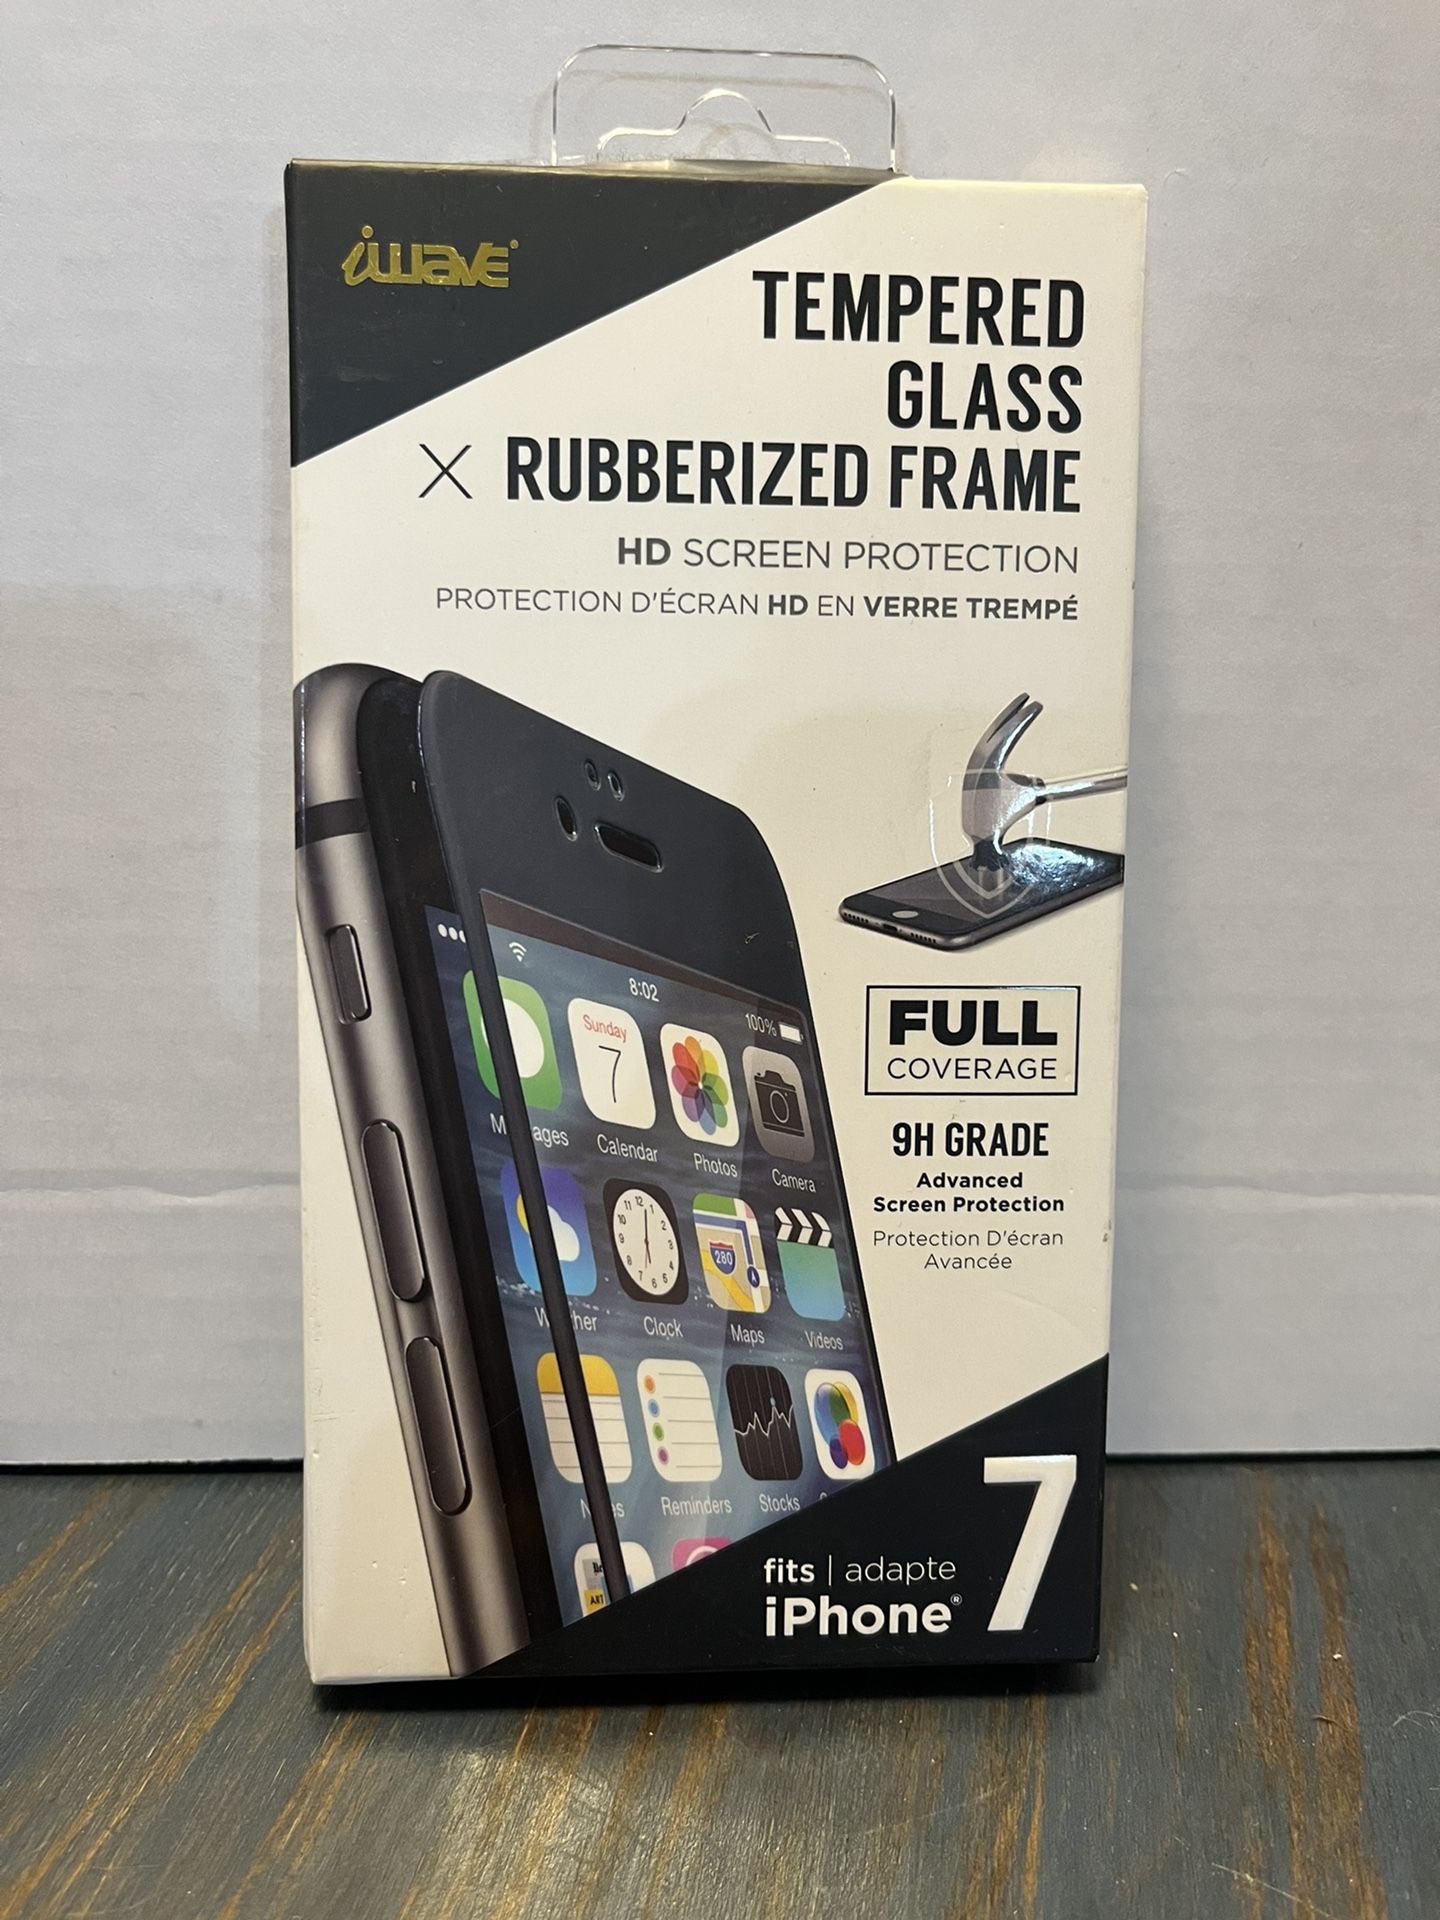 Tempered Glass Rubberized Frame For iPhone 7